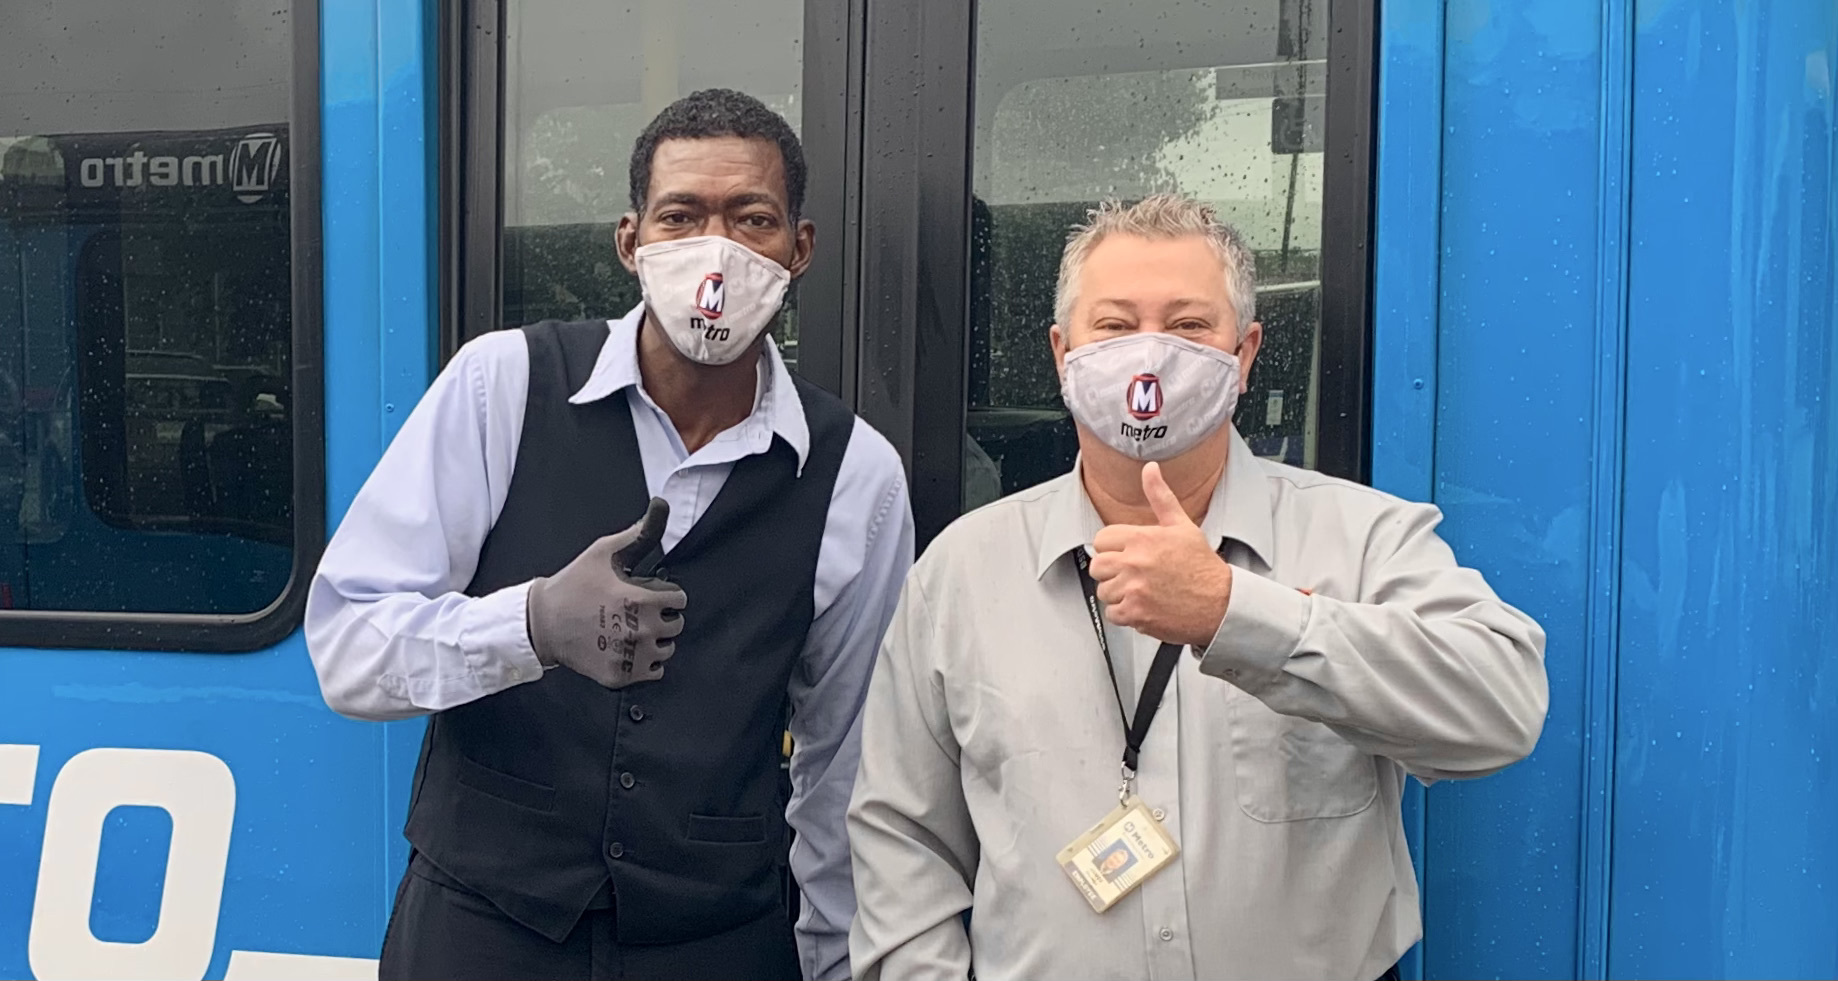 Metro Call-A-Ride Operators of the Year, Jerome Papkin and James Belleville celebrate with a thumbs up!